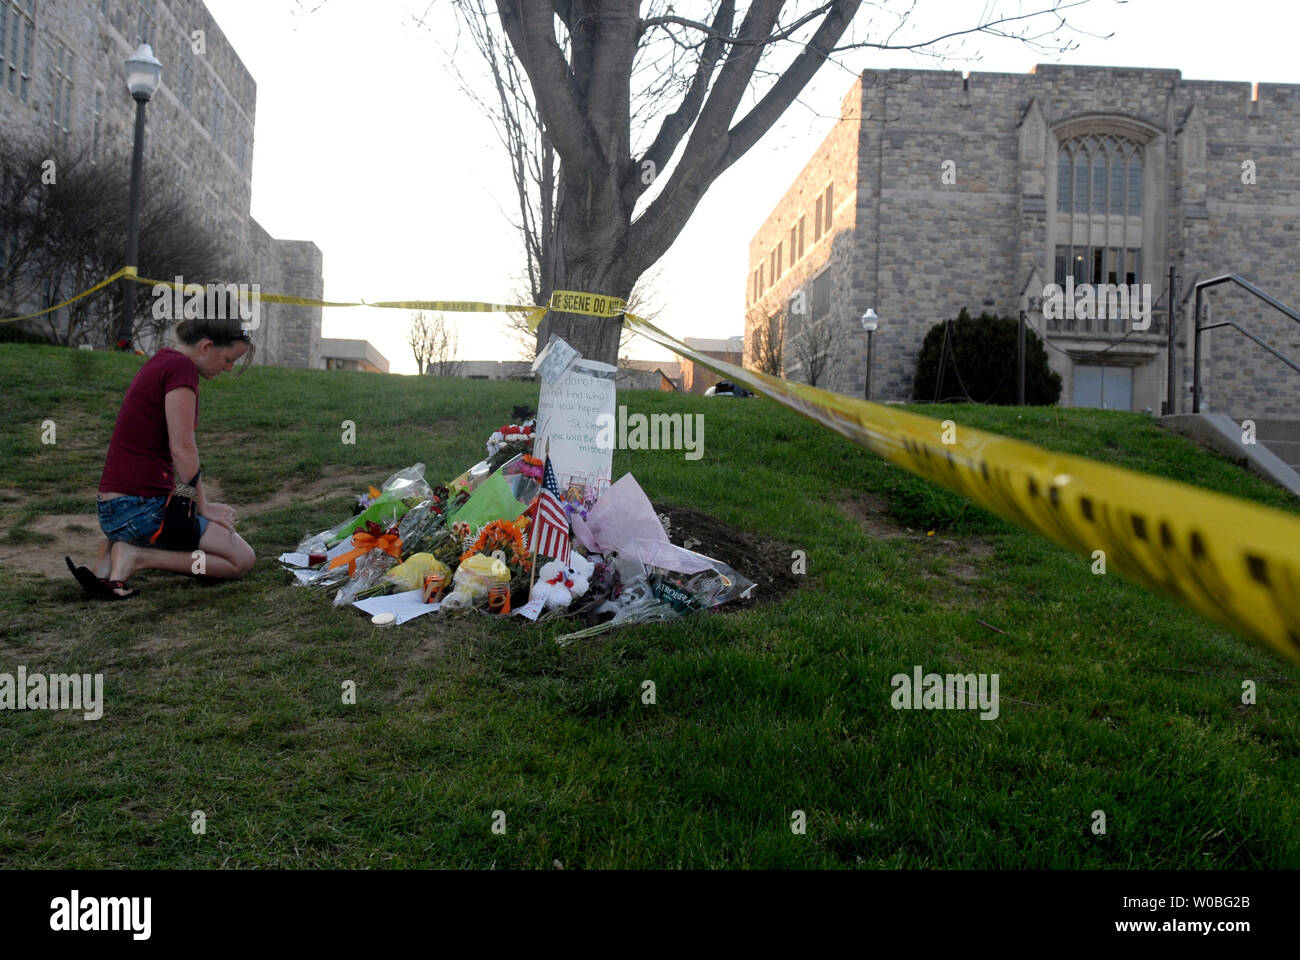 A young woman visits a memorial in front of Norris Hall, on the campus of Virginia Tech in Blacksburg, Virginia on April 22, 2007. Cho Seung-Hui, a student at Virginia Tech, went on a shooting spree and murdered 32 people on April 16, 2007, the deadliest school shooting in U.S. history. (UPI Photo/Kevin Dietsch) Stock Photo